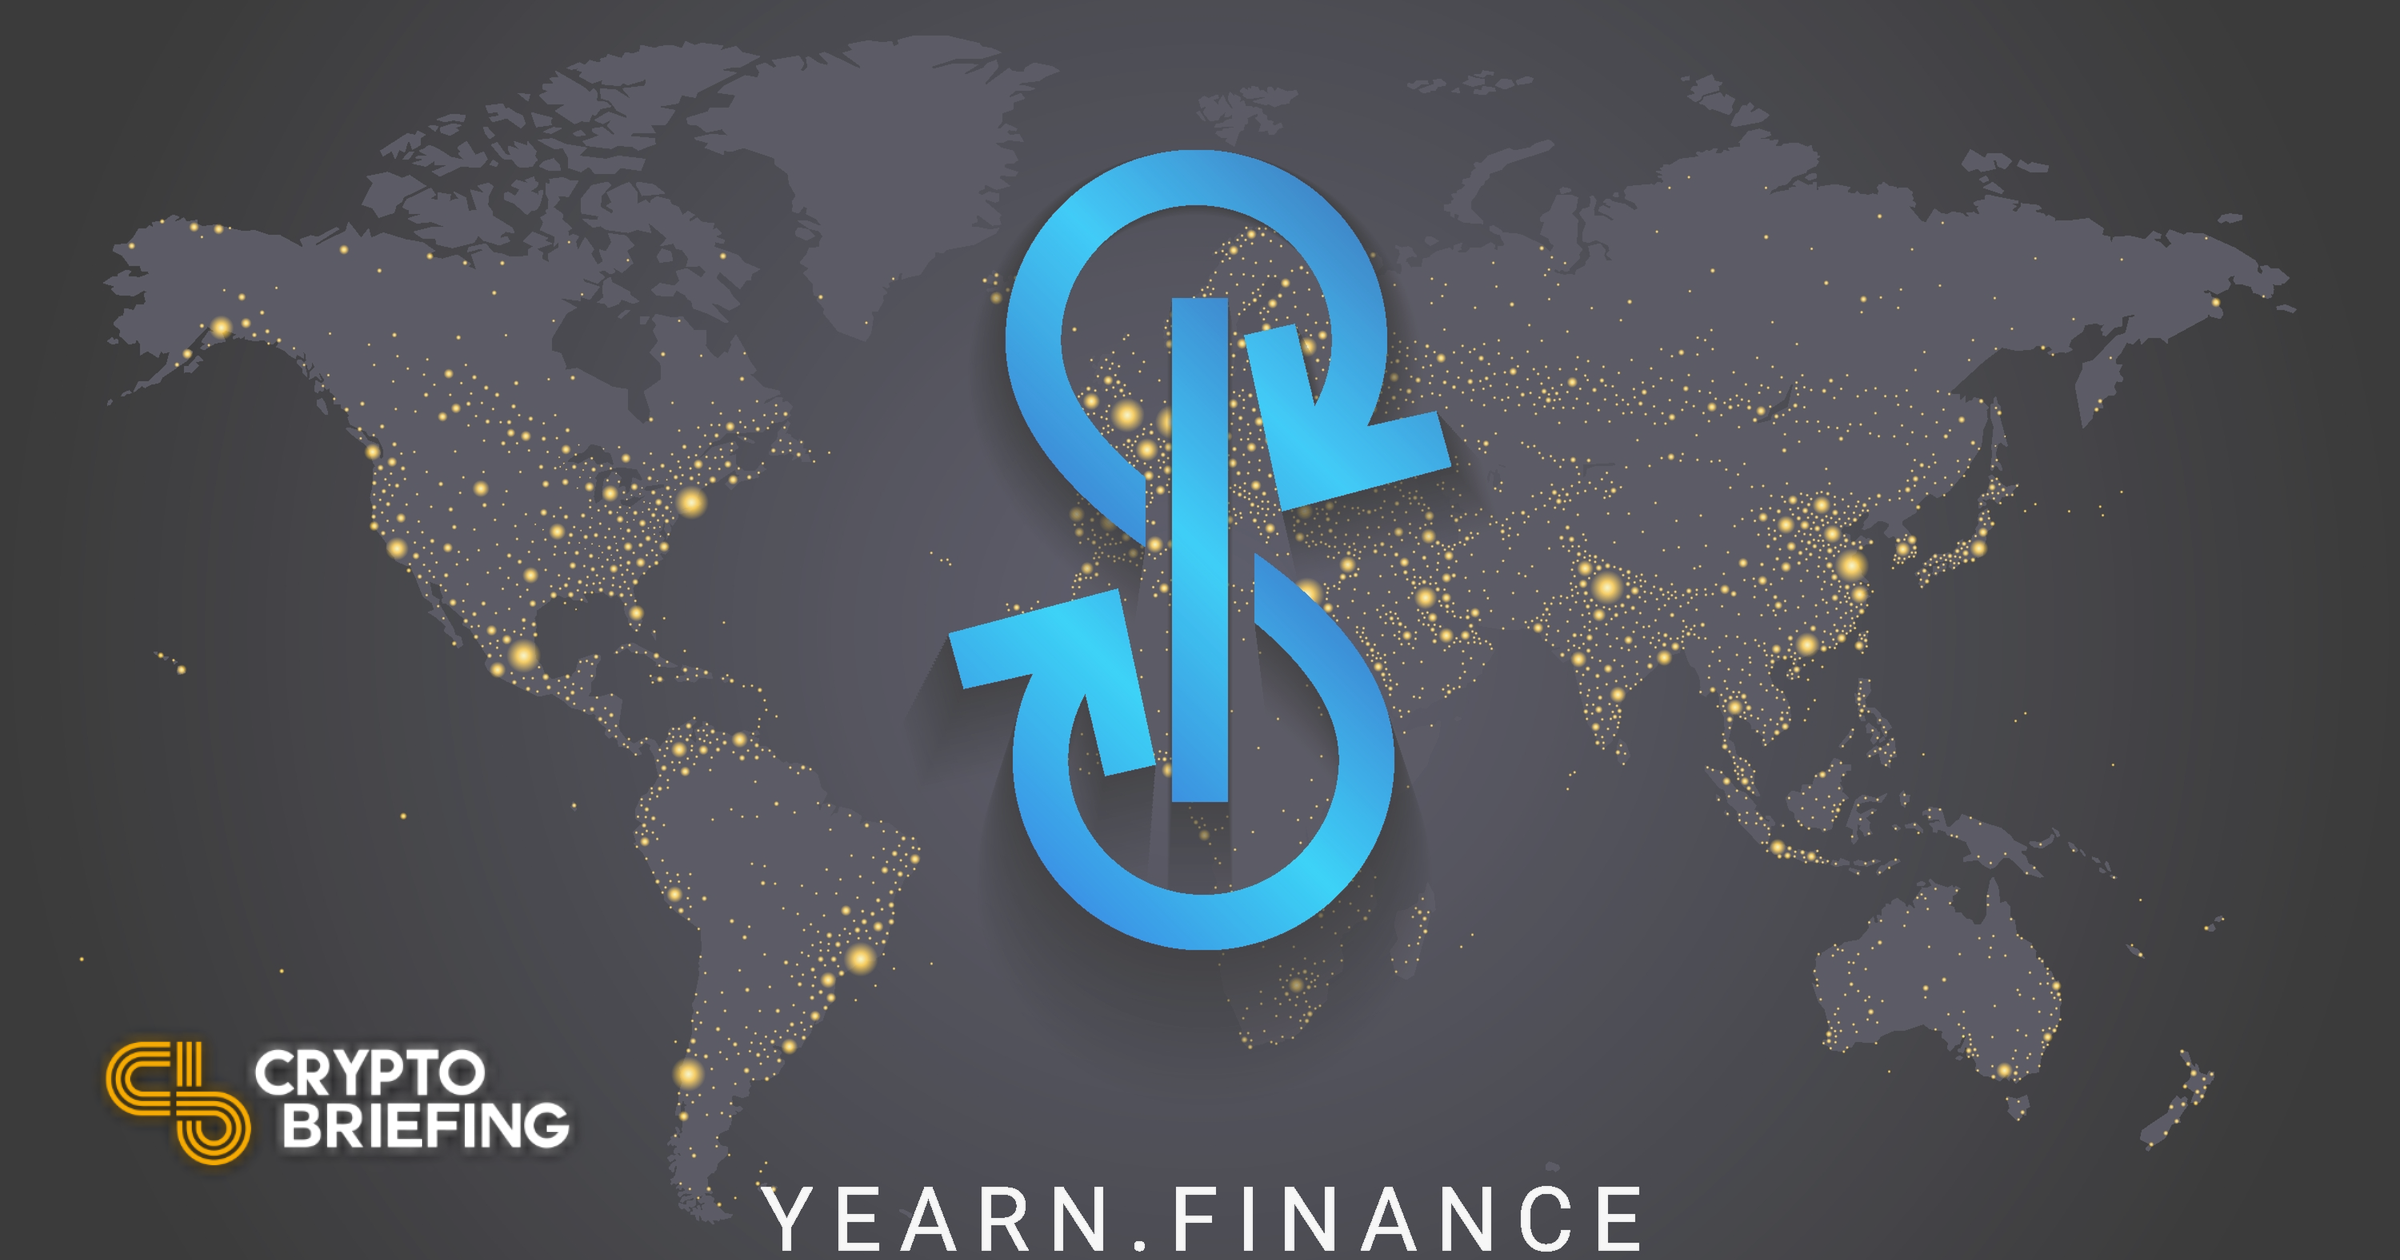 What Is Yearn Finance (YFI) in DeFi & How Does It Work?